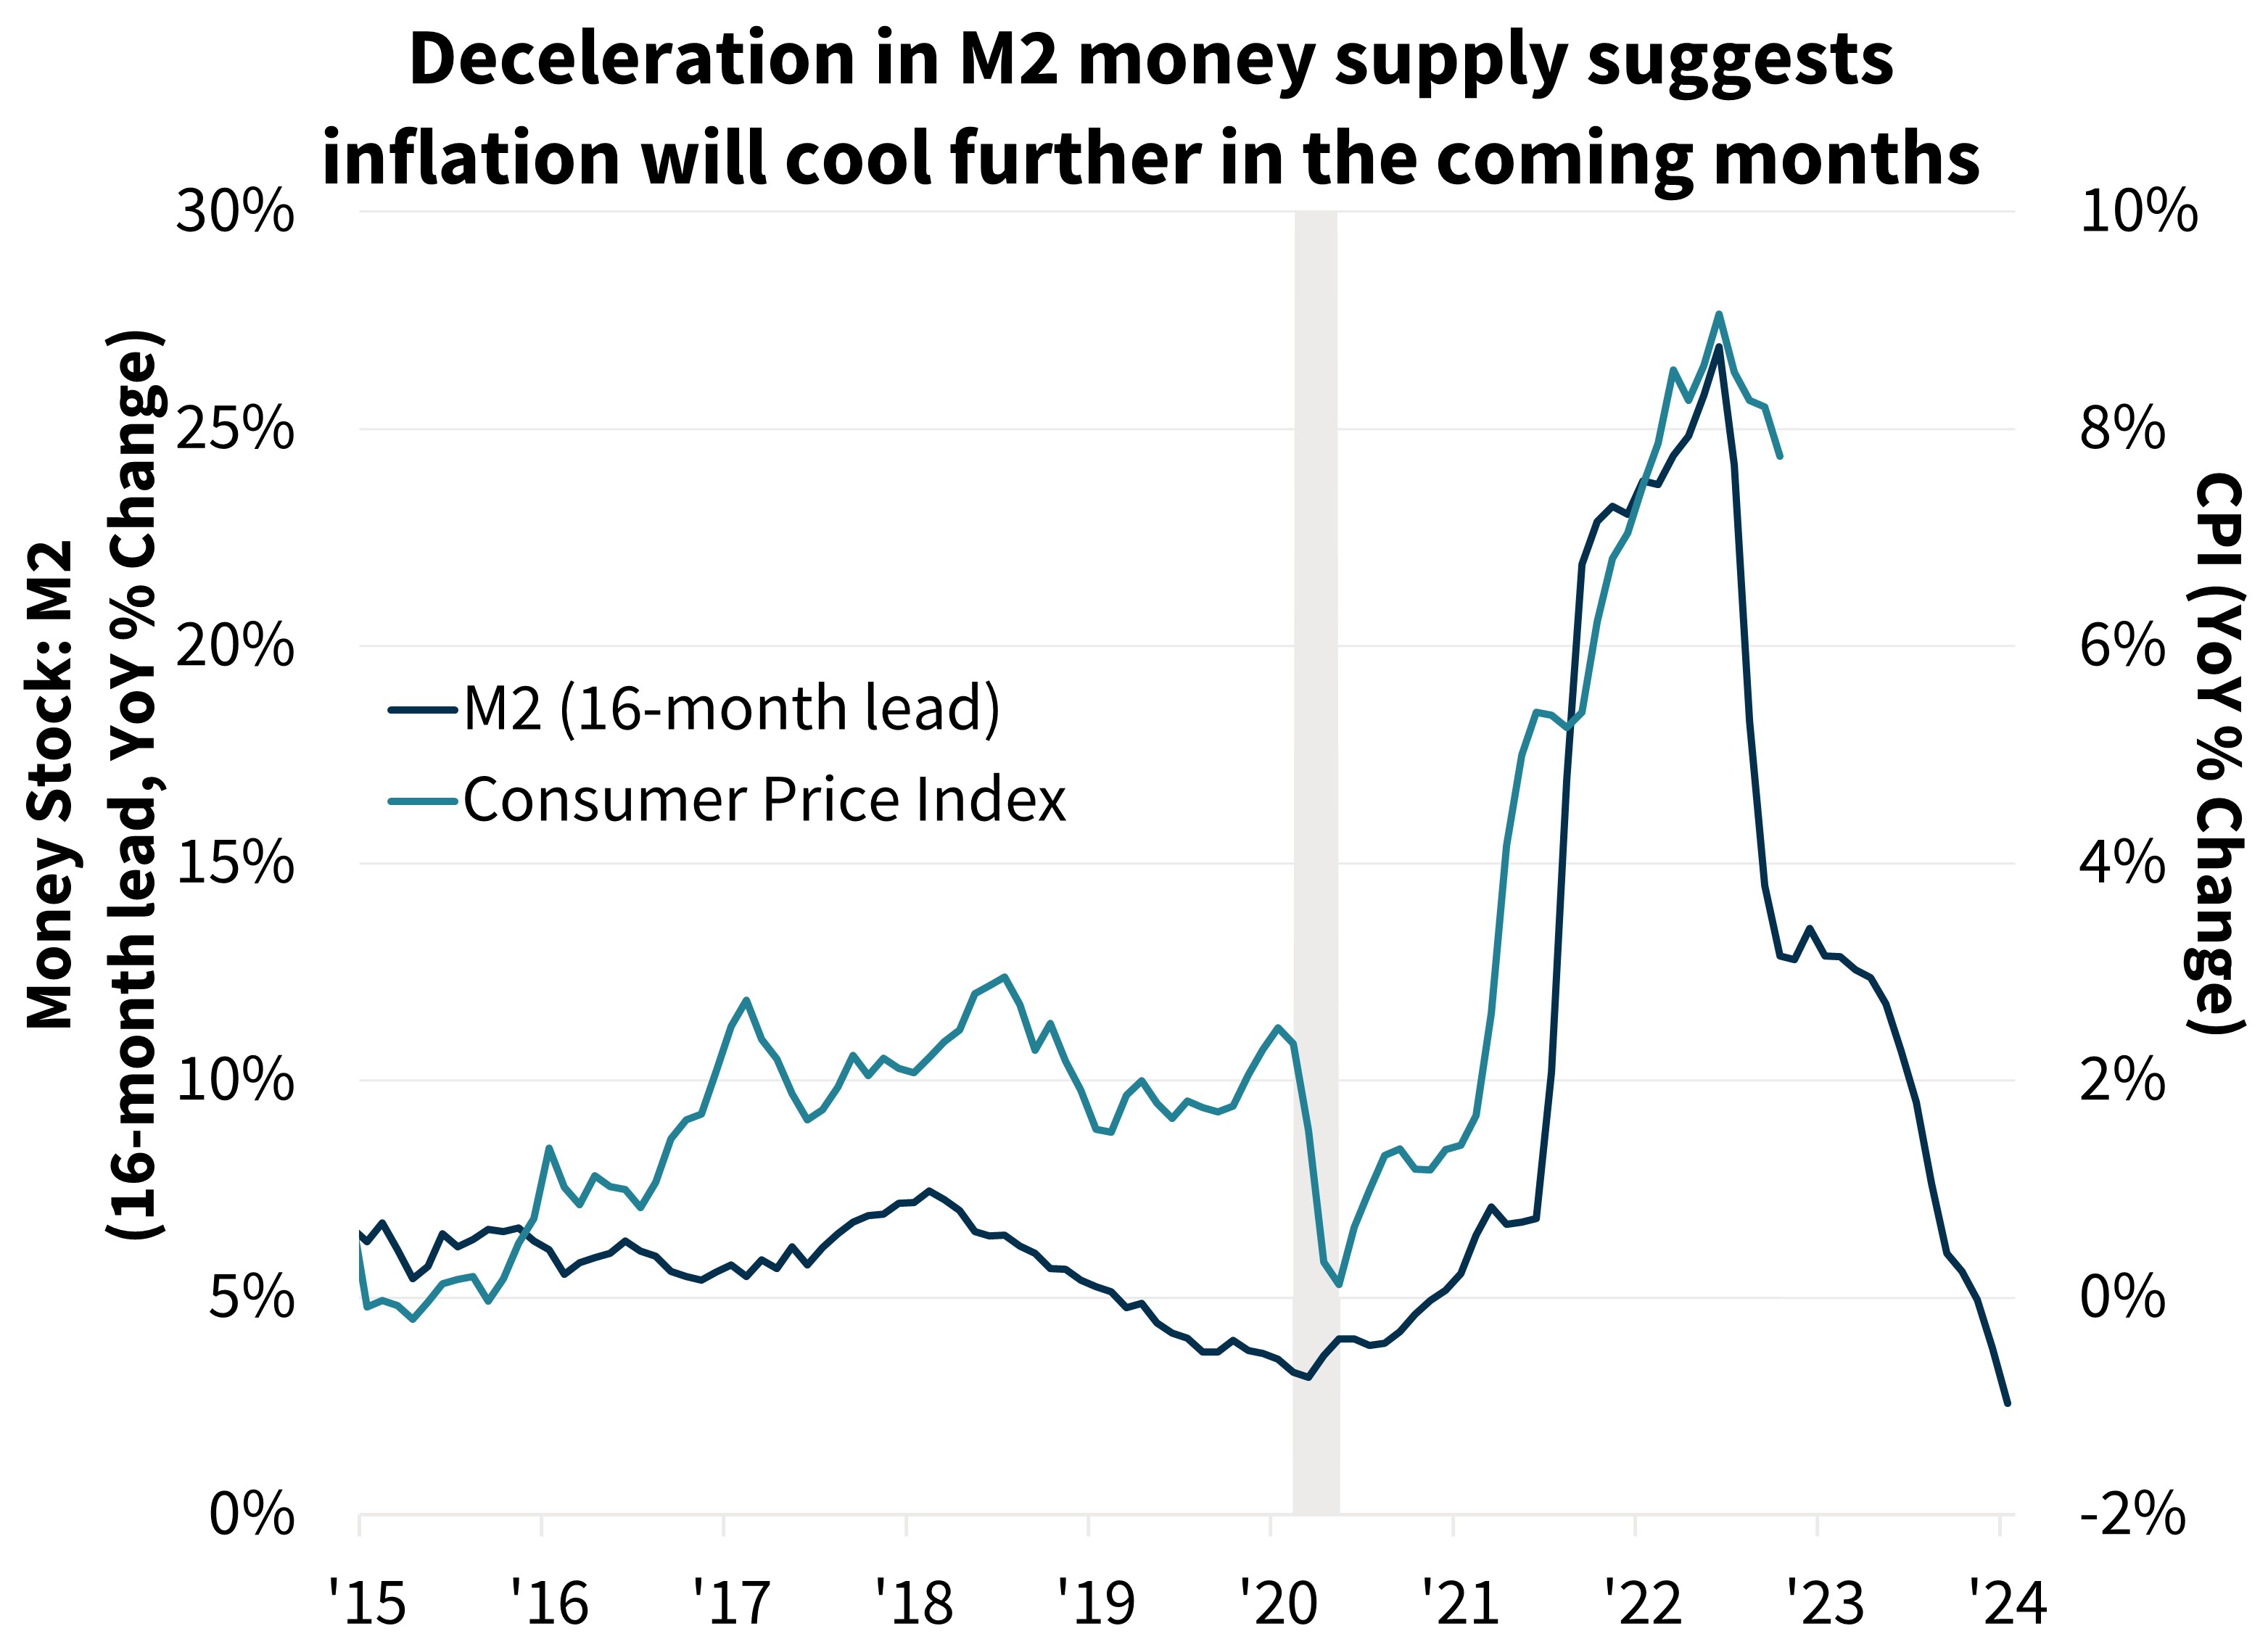  Deceleration in M2 money supply suggests inflation will cool further in the coming months 